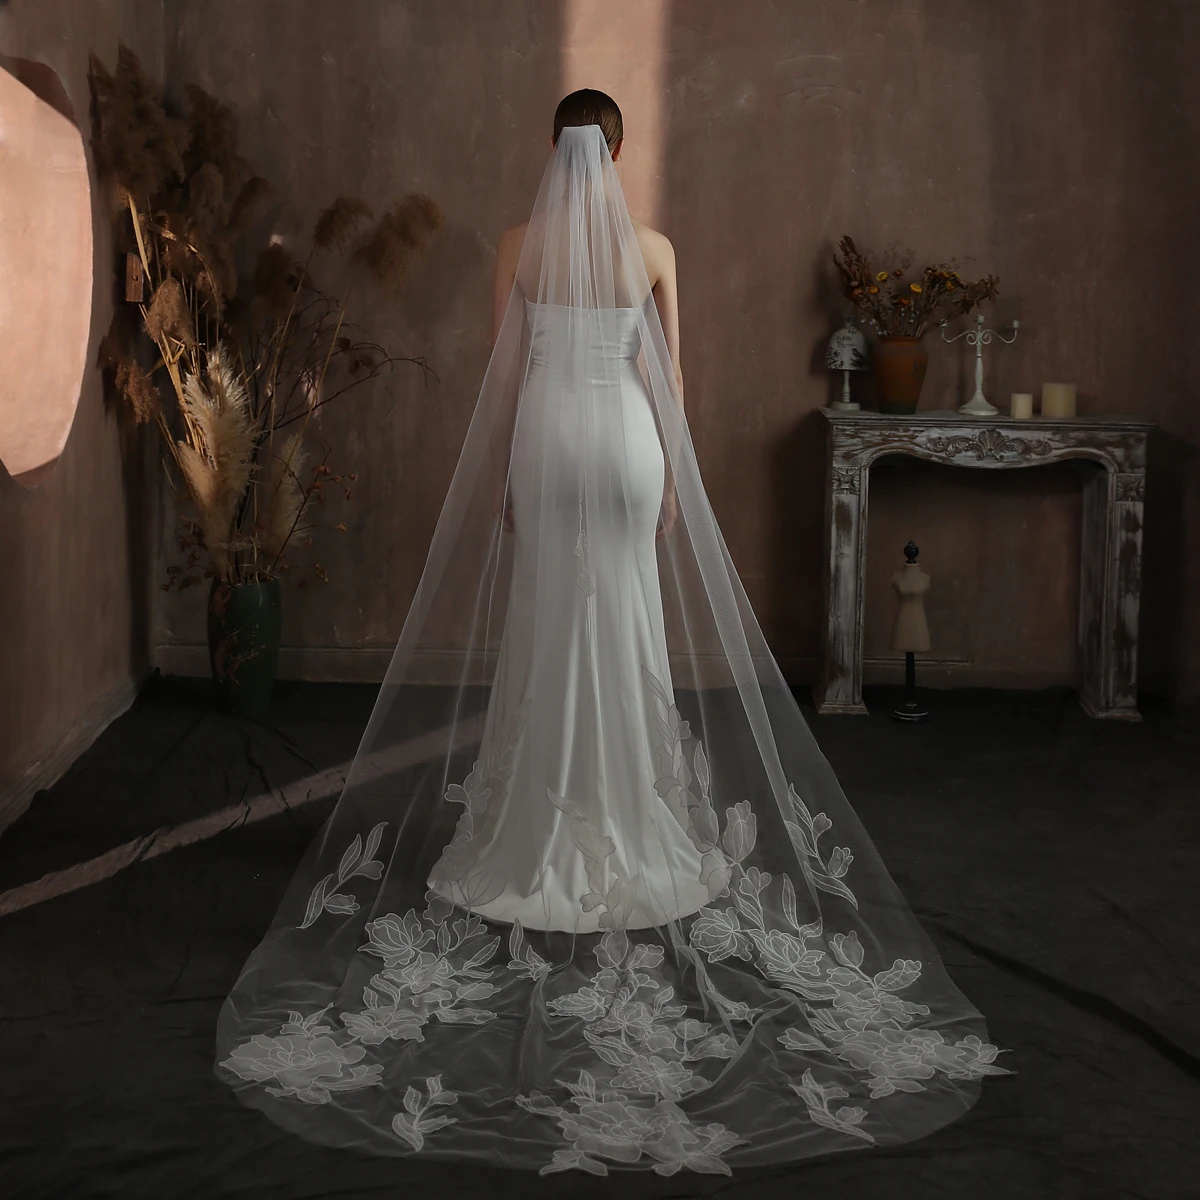 v337-luxurious-wedding-bridal-cathedral-veil-soft-tulle-embroidered-lace-decor-long-train-white-handmade-brides-royal-veil